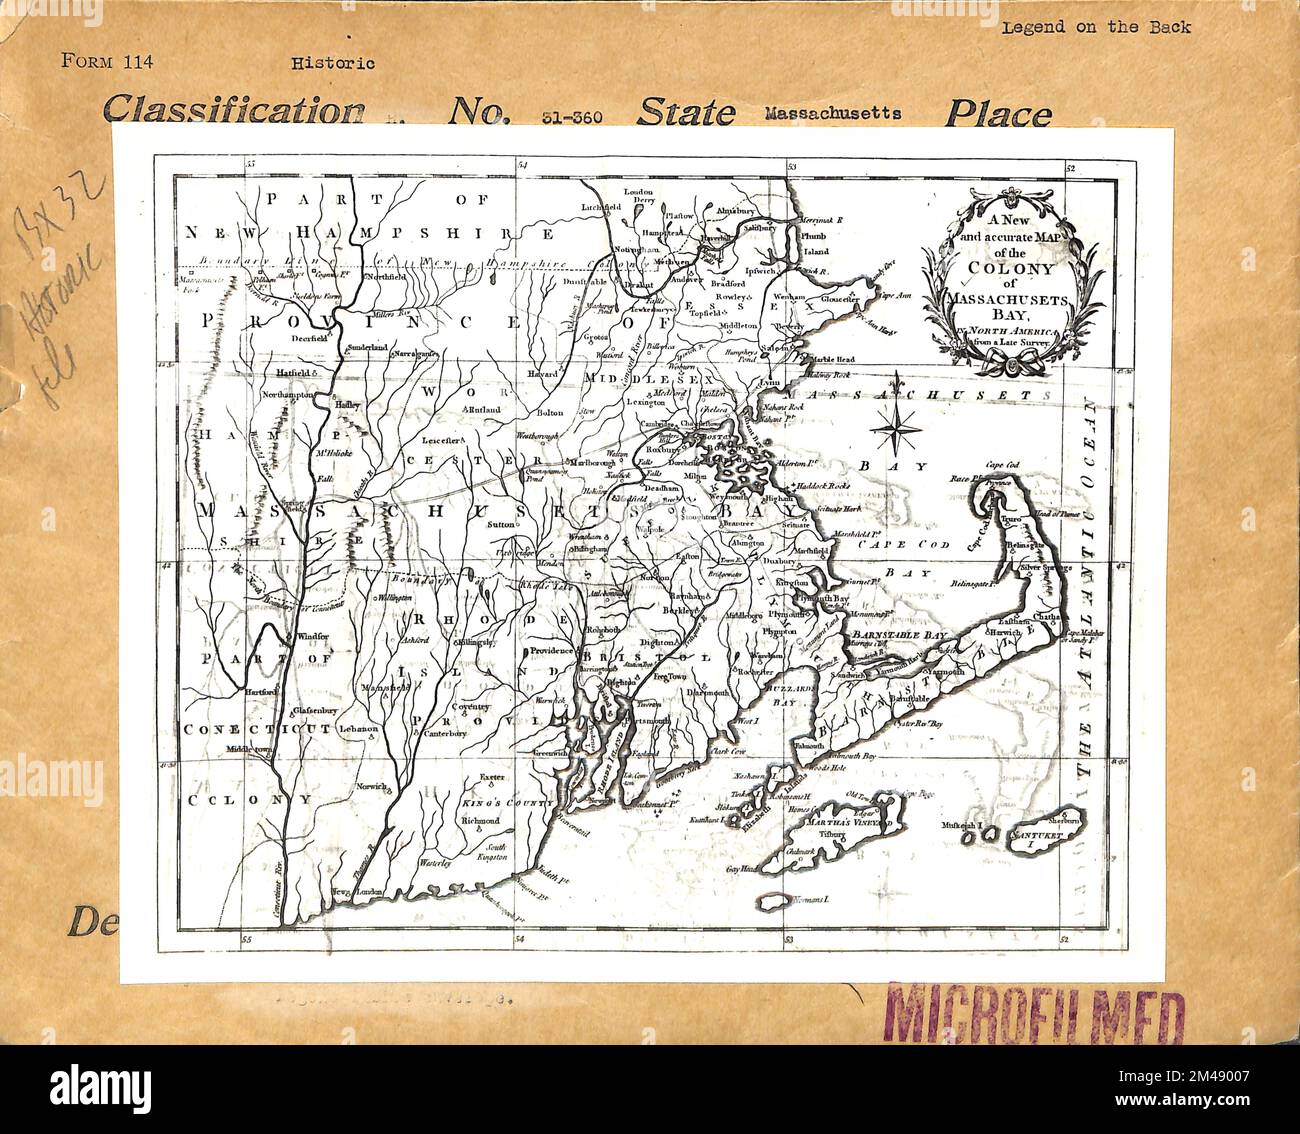 A New and Accurate Map of the Colony of Massachusetts Bay. Original caption: A new and accurate map of the Colony of Massachusetts Bay - Universal Magazine of Knowledge and Pleasure, London, England. p. 281, vol. 67, July - Dec. 1780. State: Massachusetts. Stock Photo